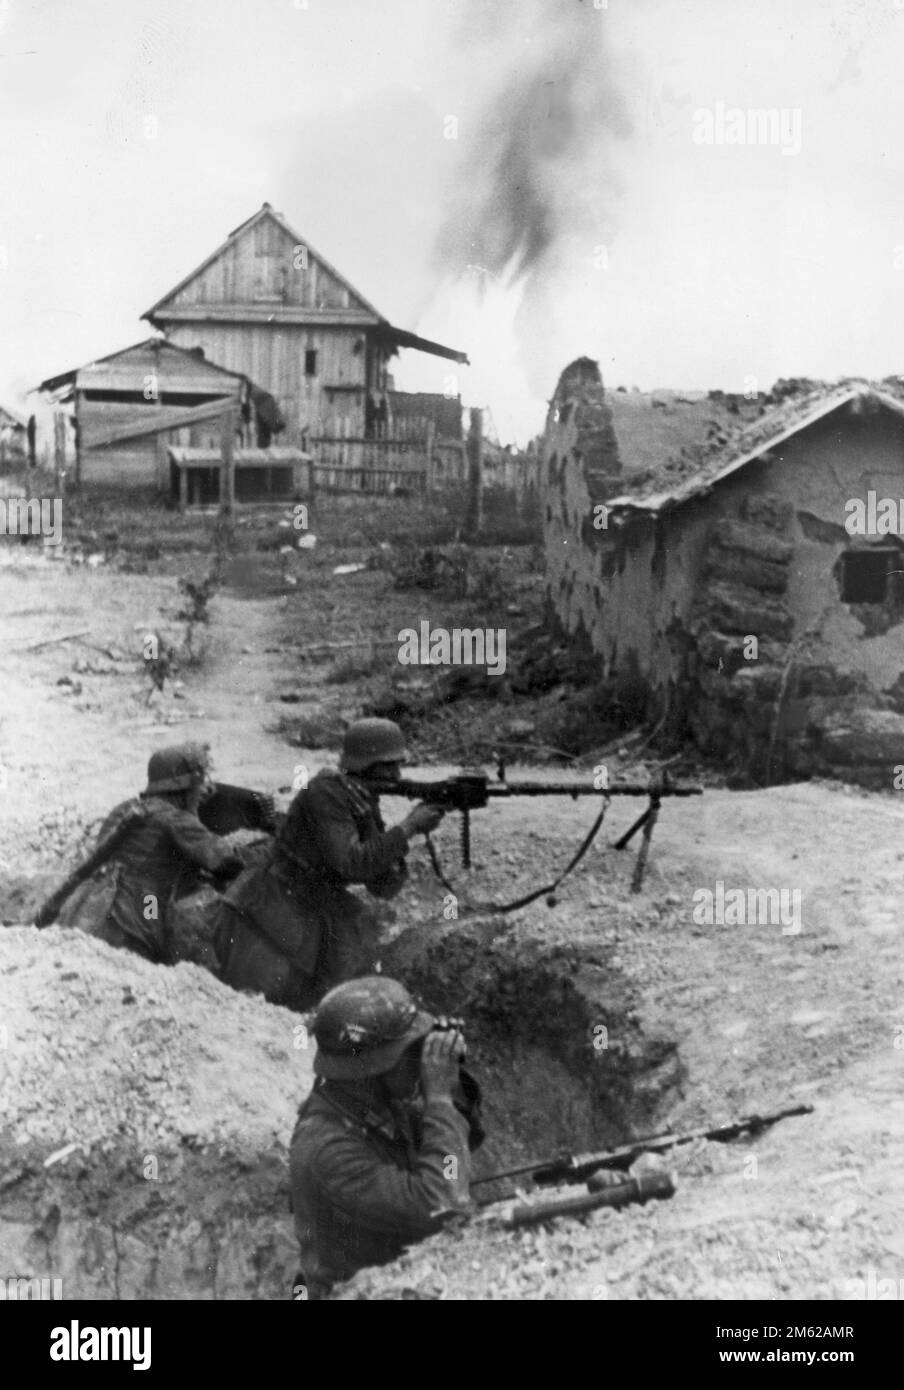 Three German soldiers (one of them with an MG-34 rifle) in a trench among village buildings near Stalingrad during the WW2 Battle of Stalingrad Stock Photo